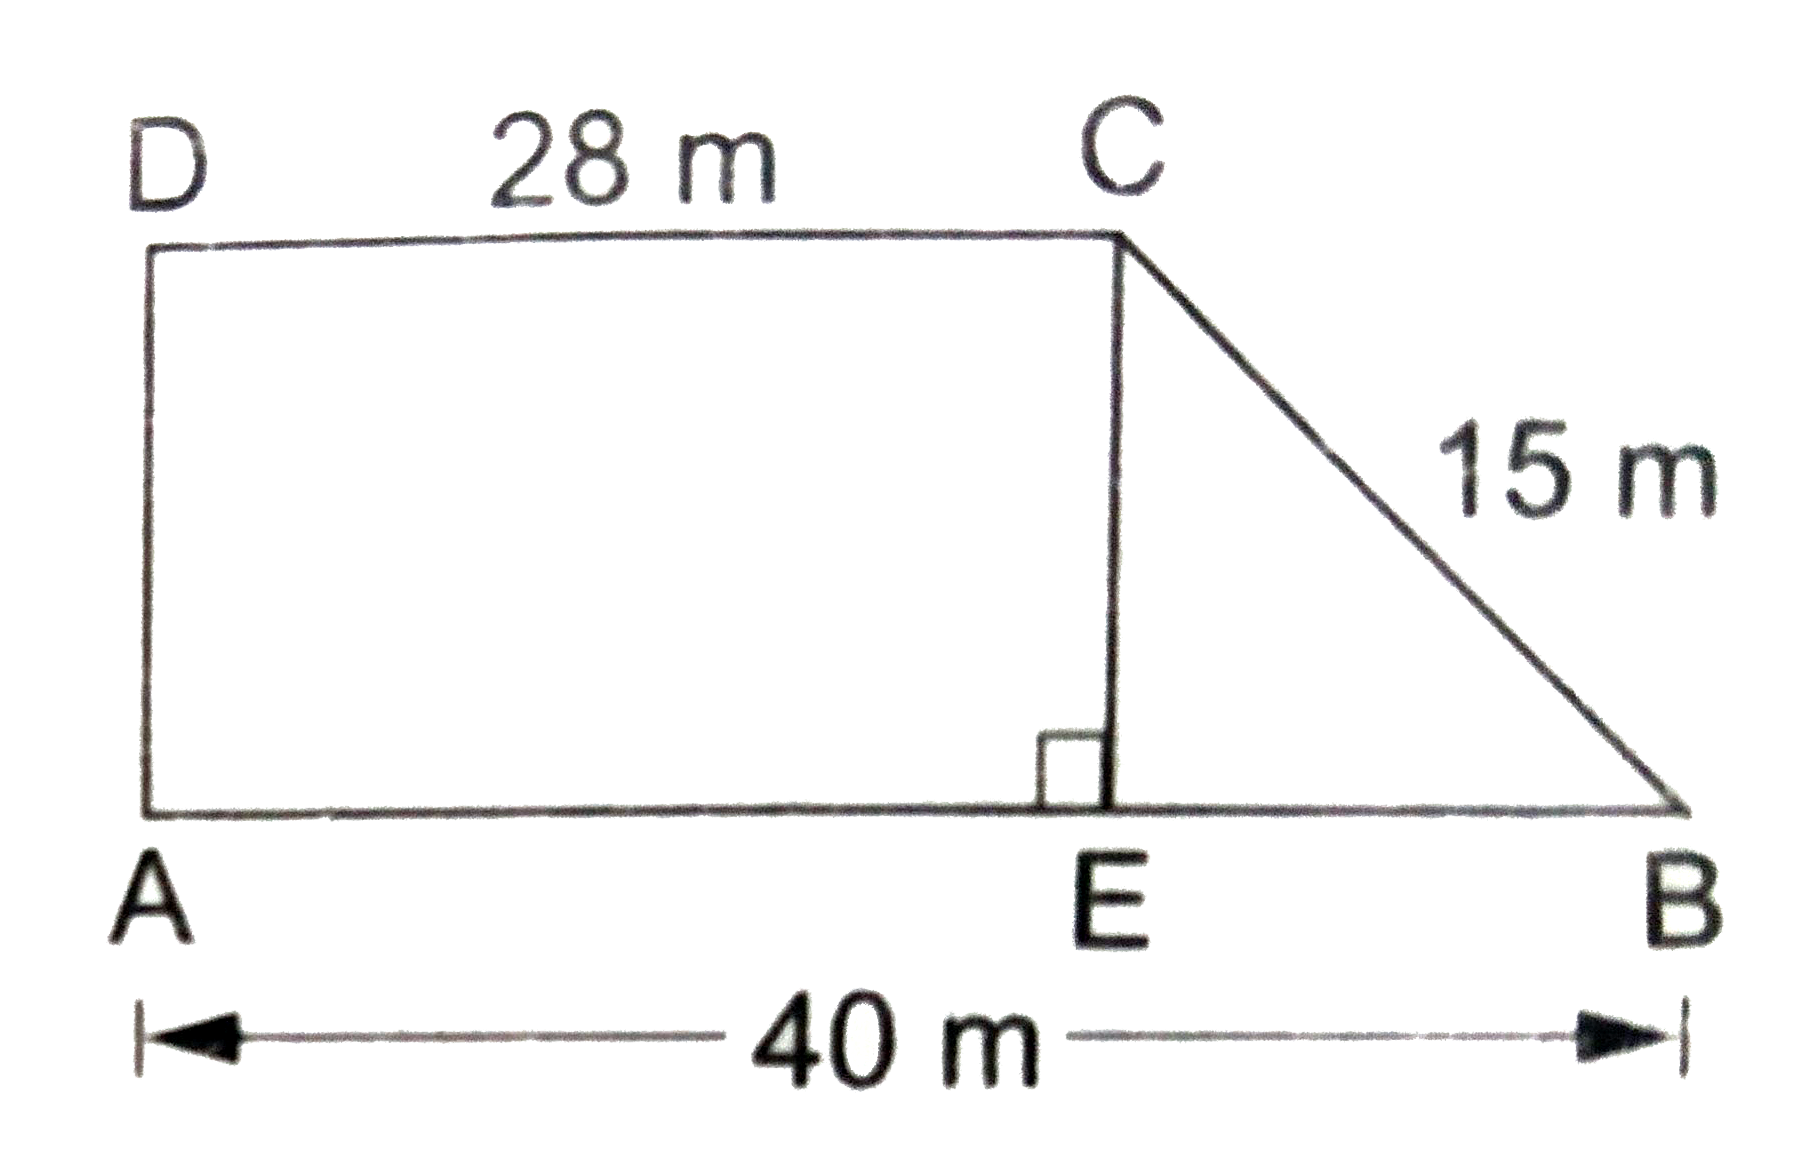 In the  given  figure  ABCD is a trapezium  in which AB = 40 m,  BC=15 m ,CD= 28 m ,AD=9 m  and CE bot AB. area  of trap.ABCD is